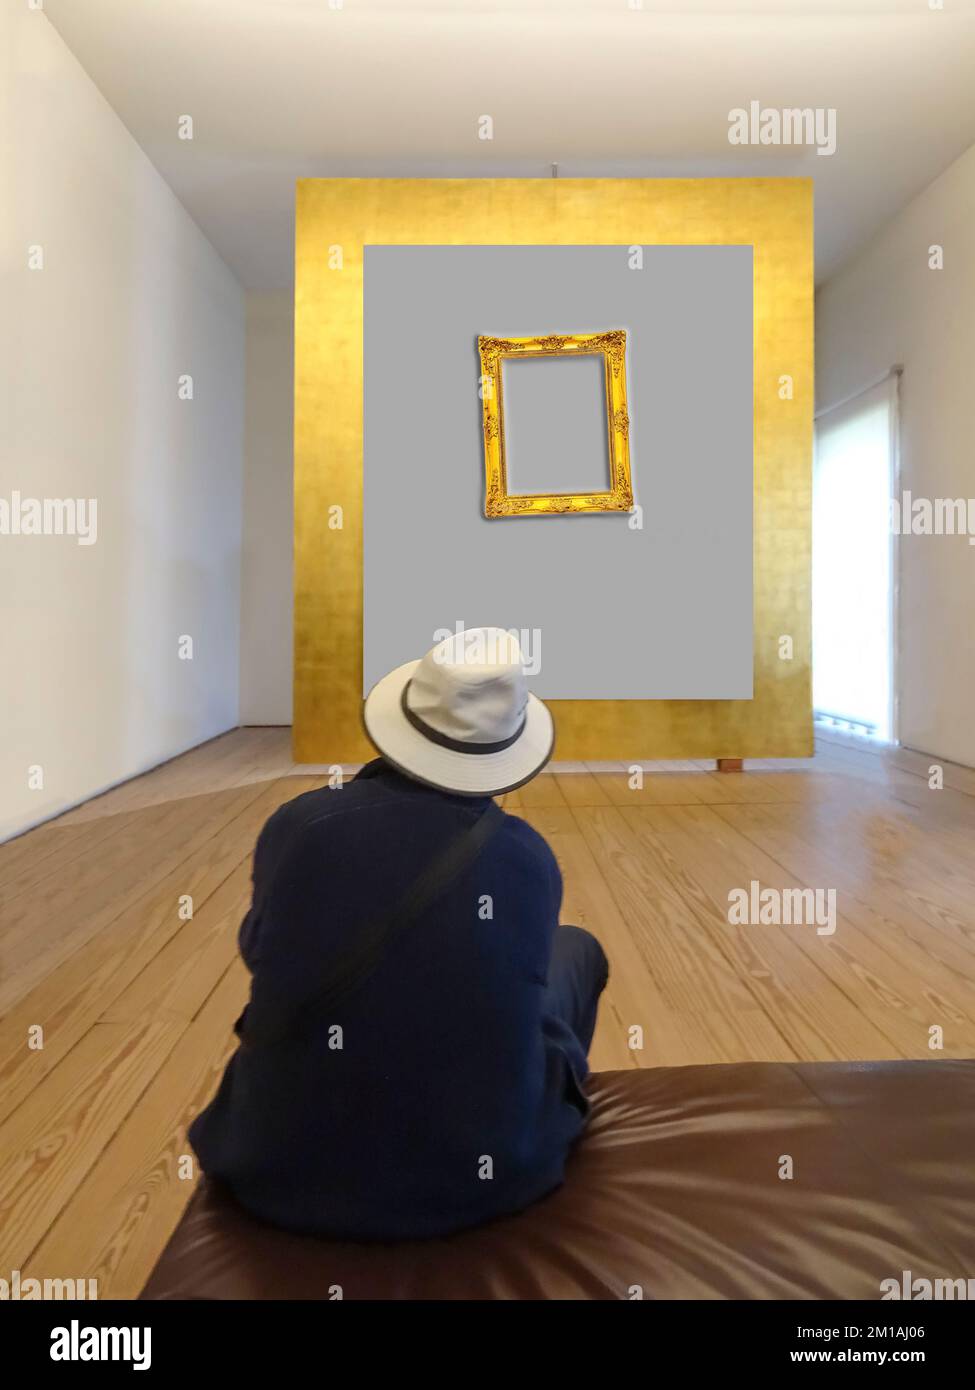 Rear view of a man with cape admiring the golden frame on the wall Stock Photo